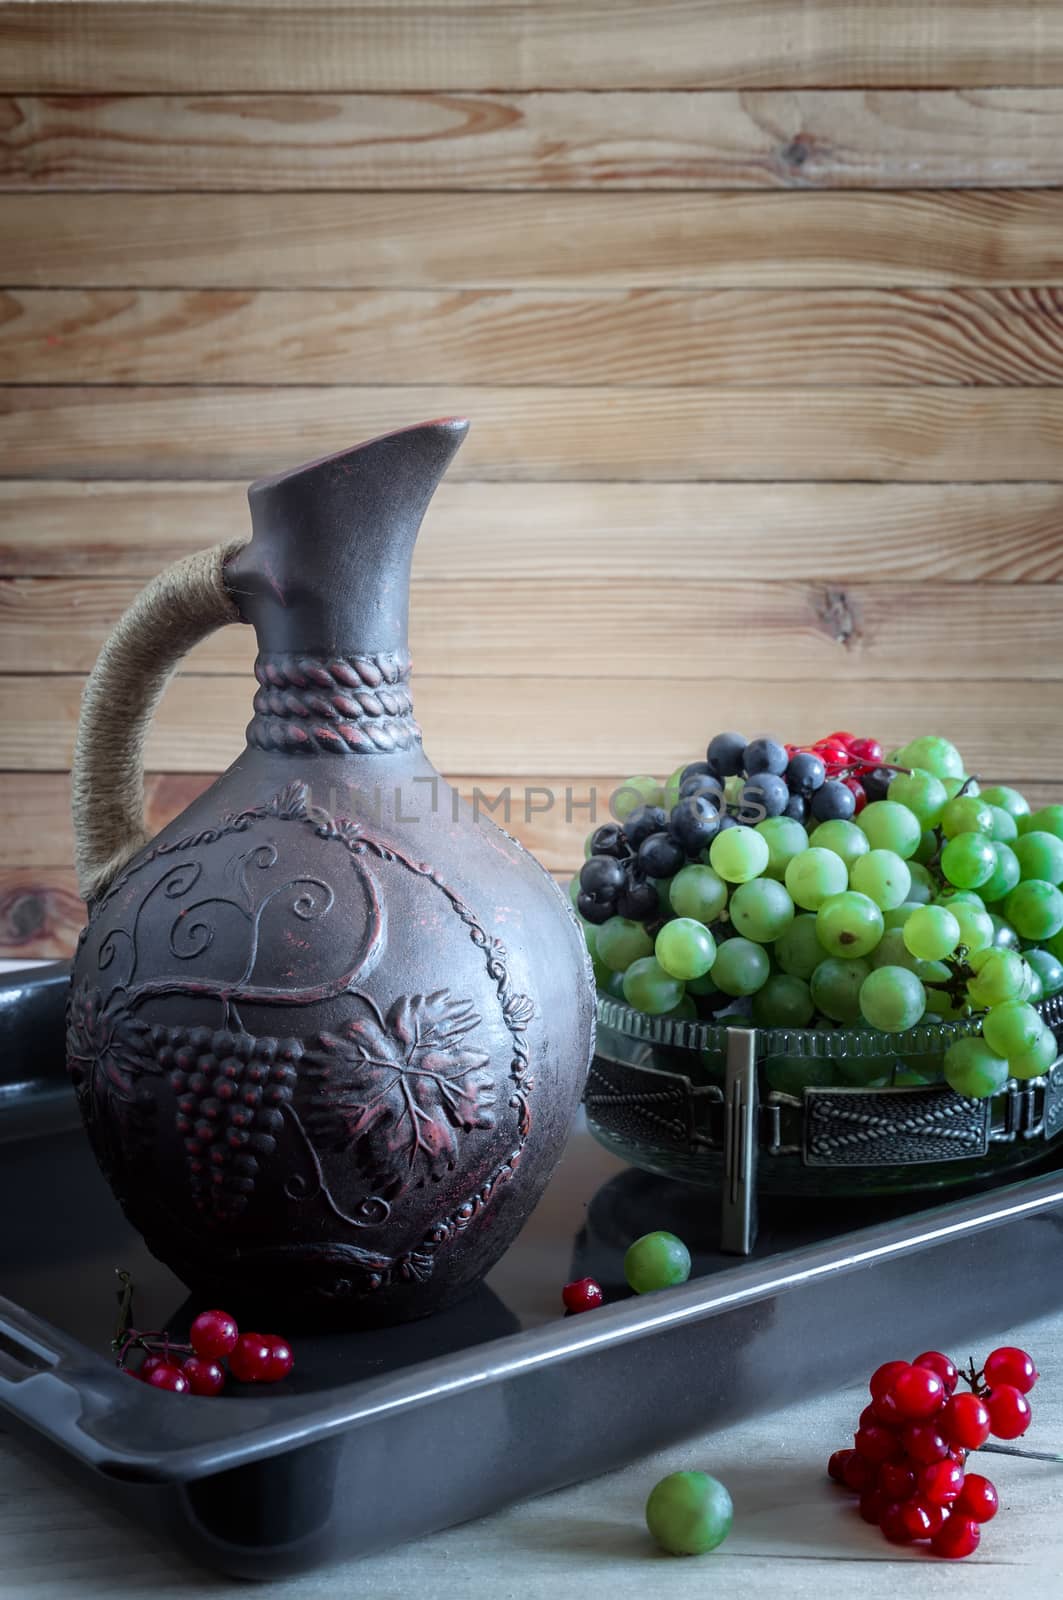 Grapes and wine in a jug on the table by georgina198